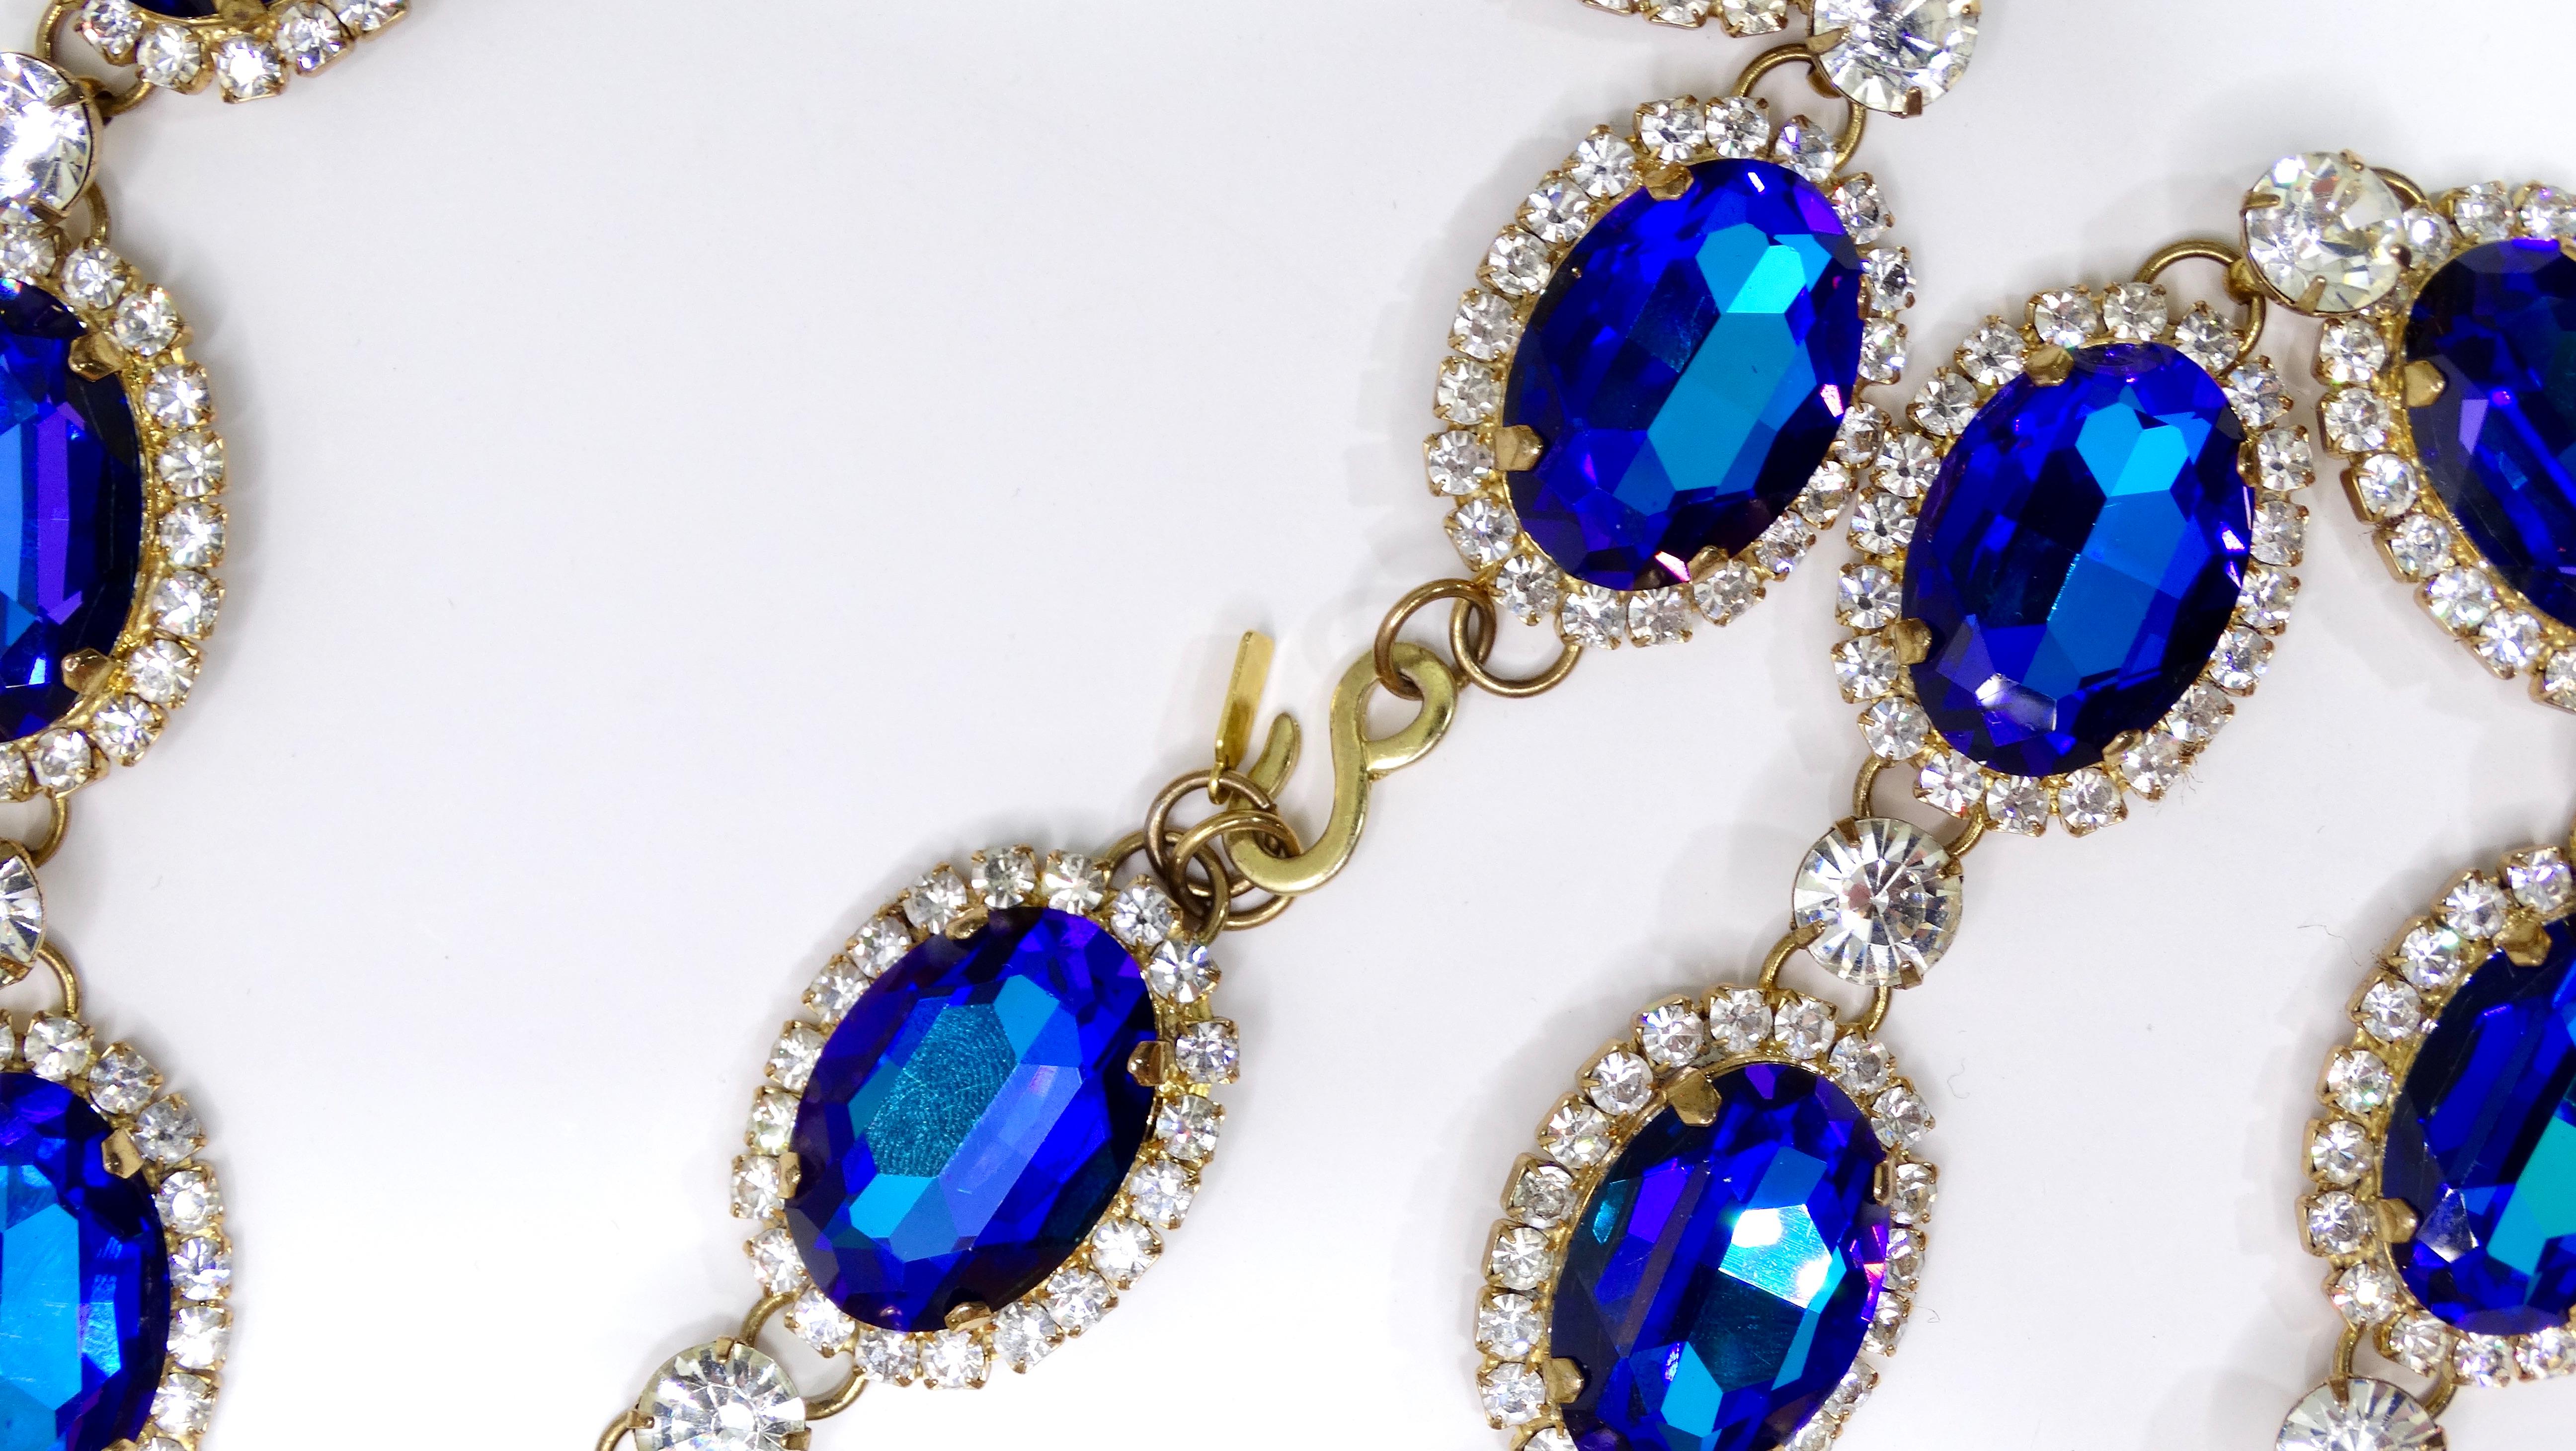 Kenneth Jay Lane 1960s Jeweled Statement Necklace For Sale 2